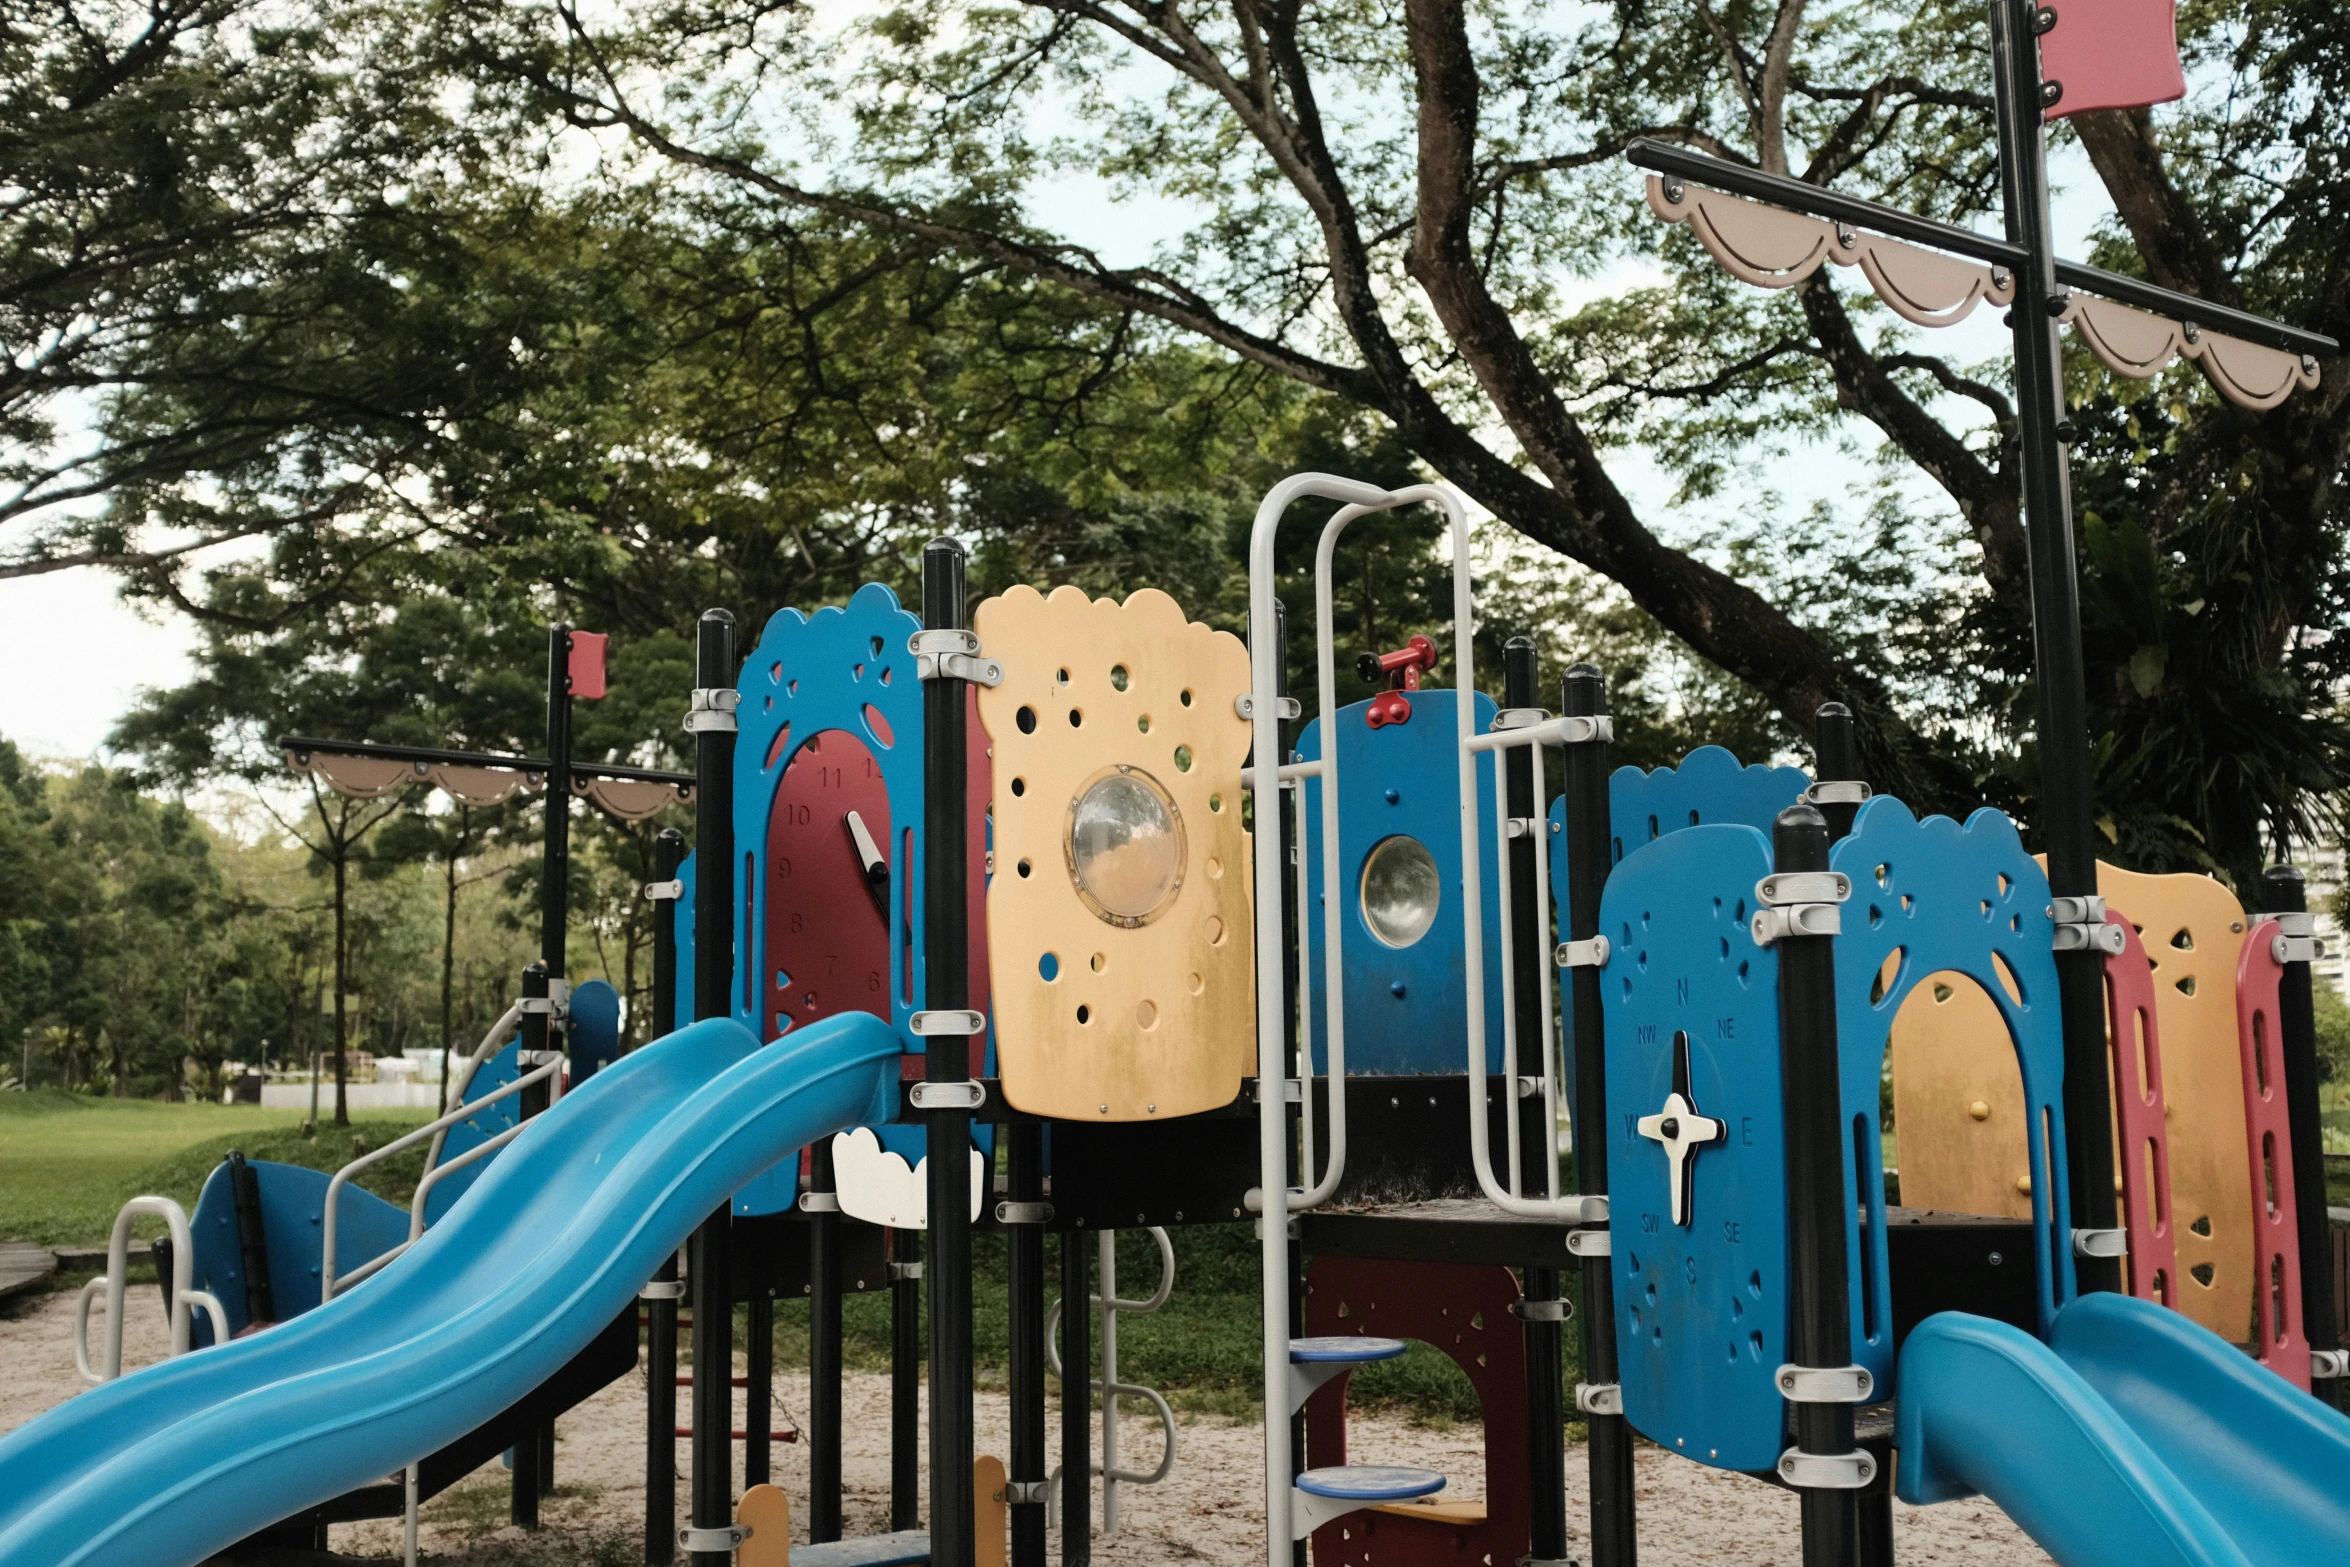 the playground is colorful and is well set